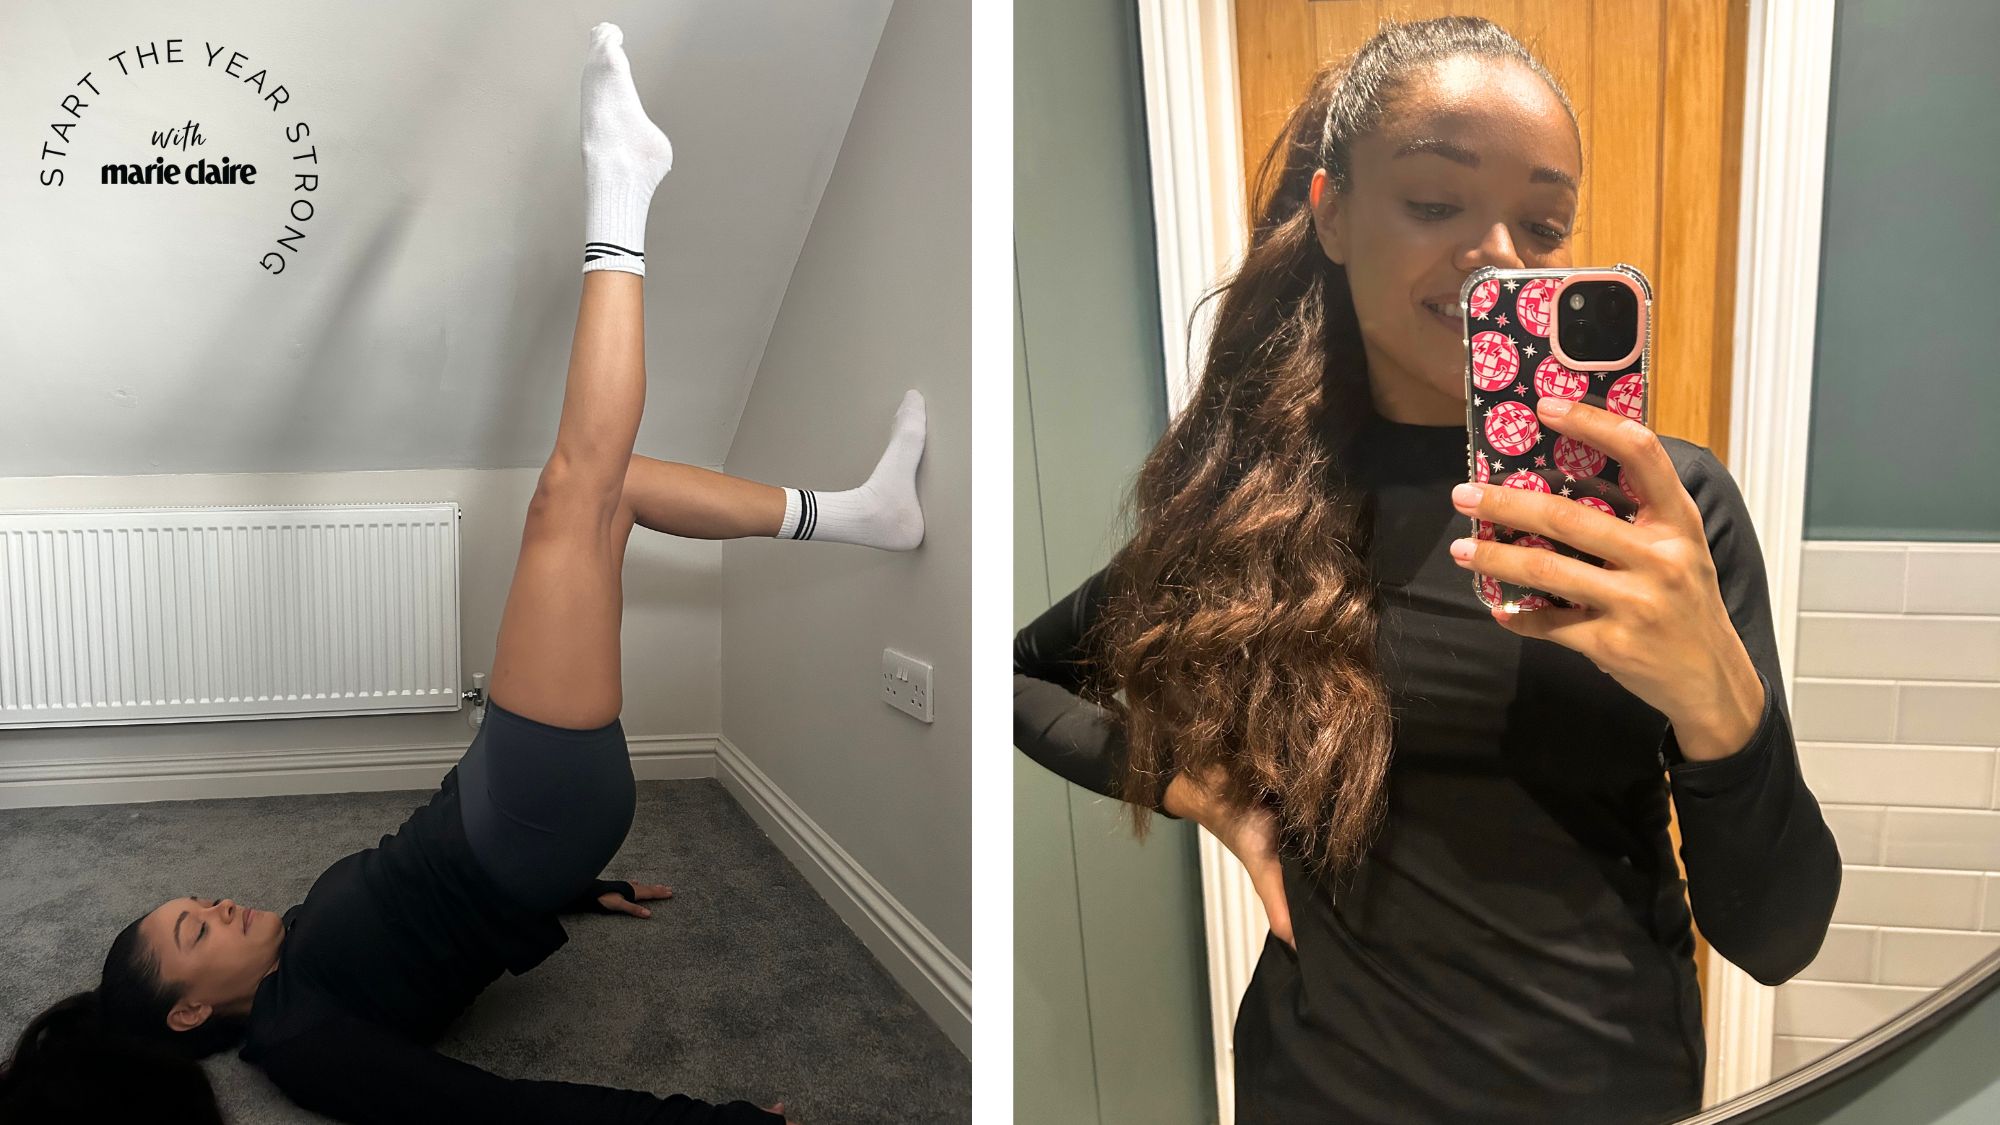 Does Wall Pilates Work? I Tried It For a Week - My Results